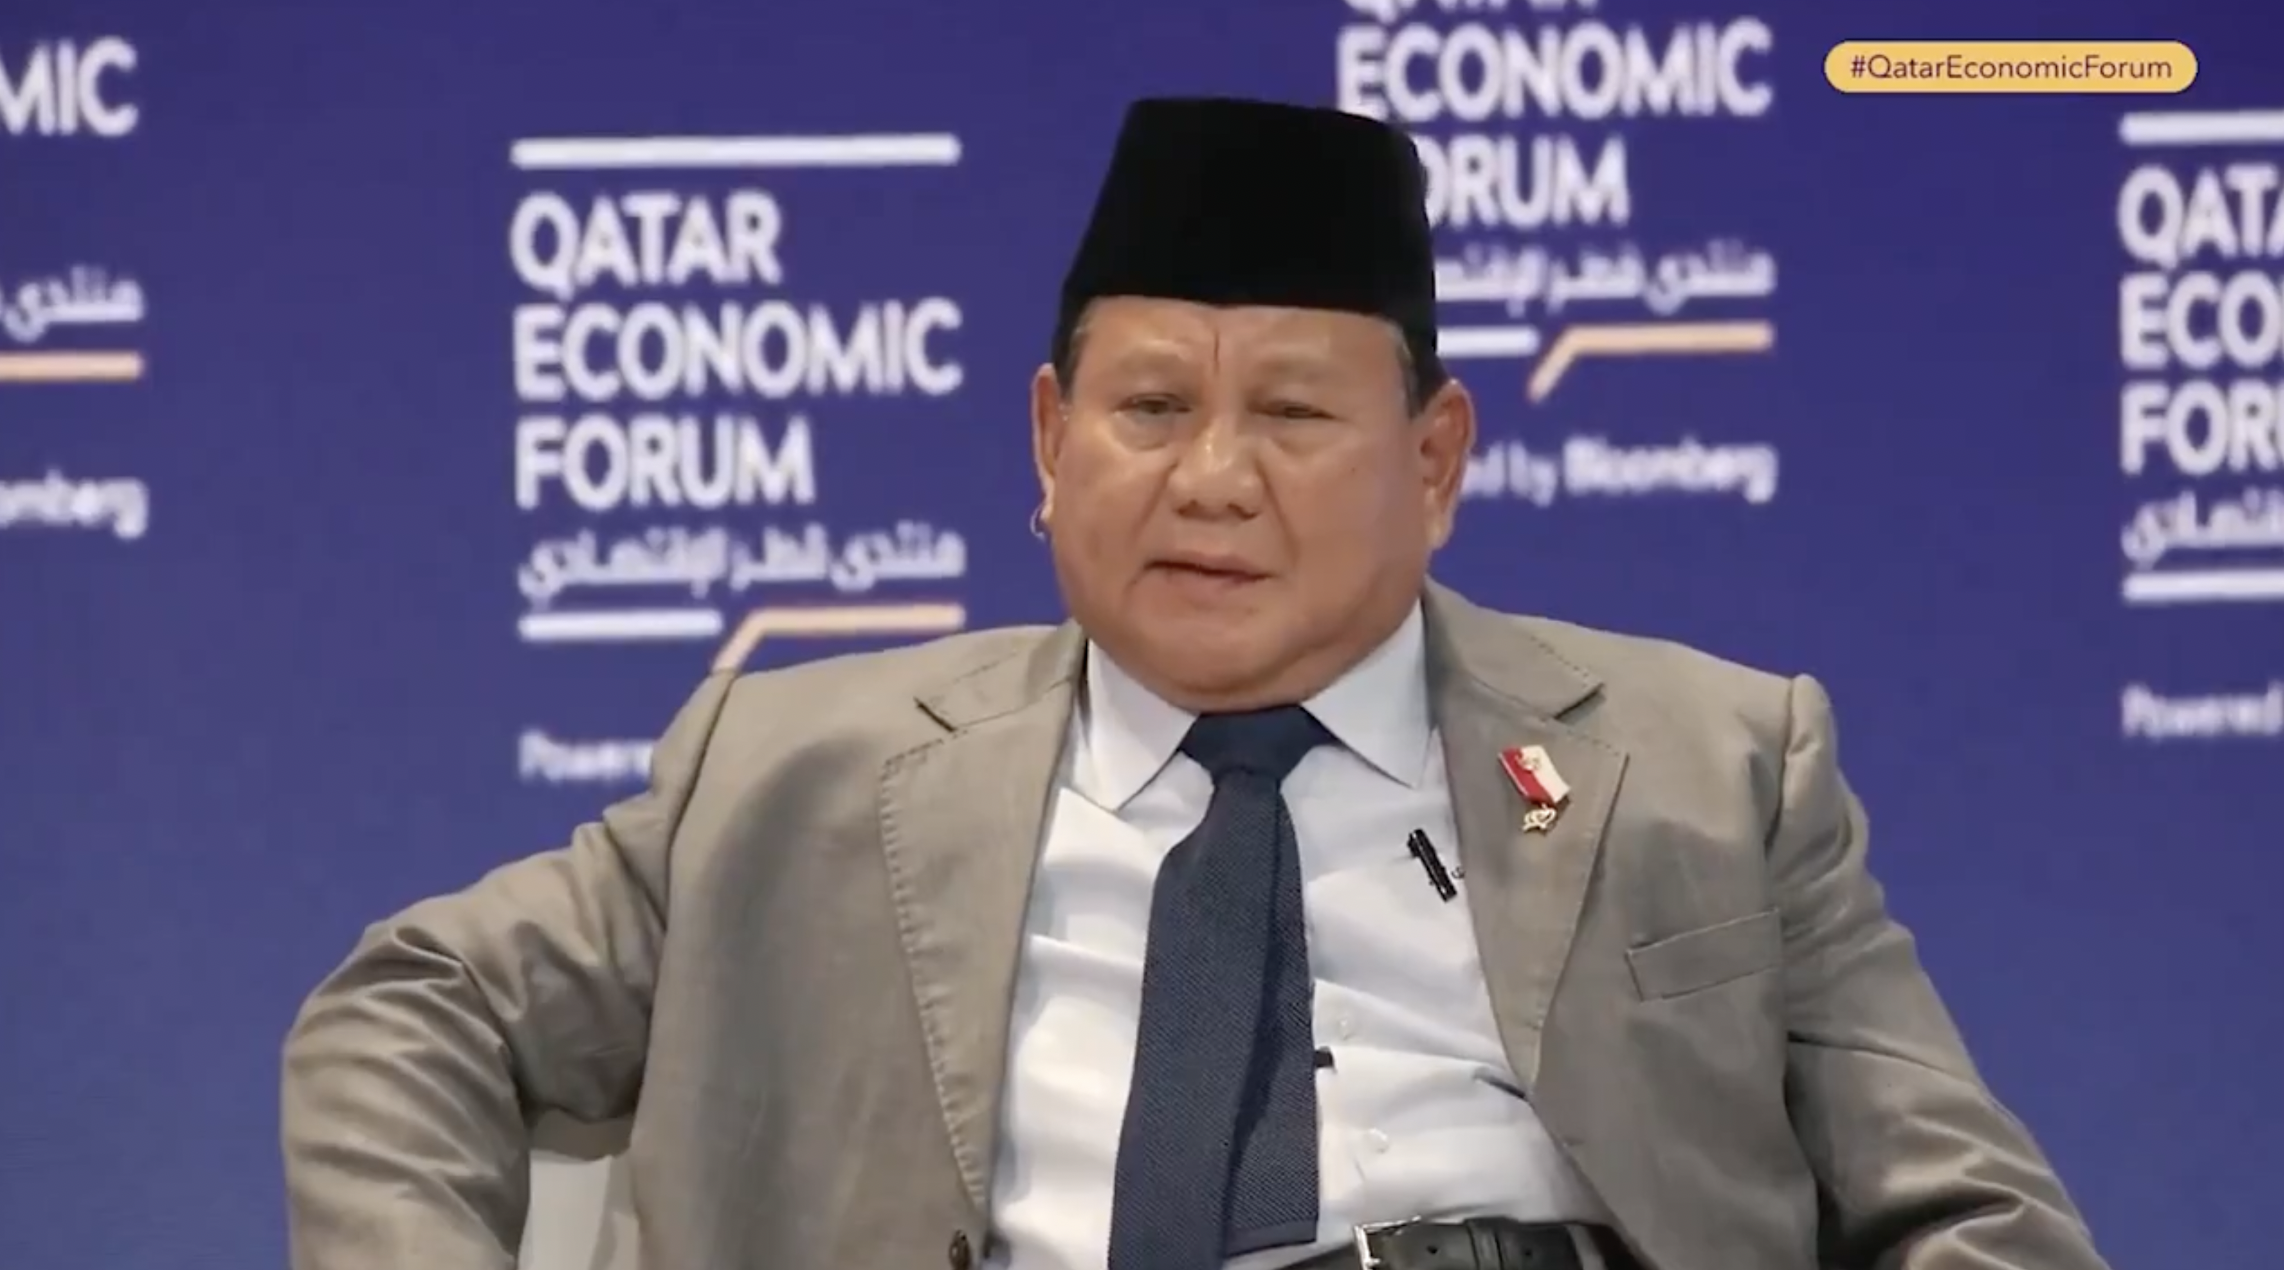 ‘Where is the concern about democracy?’: Indonesia’s president-elect challenges concerns about leadership style at QEF